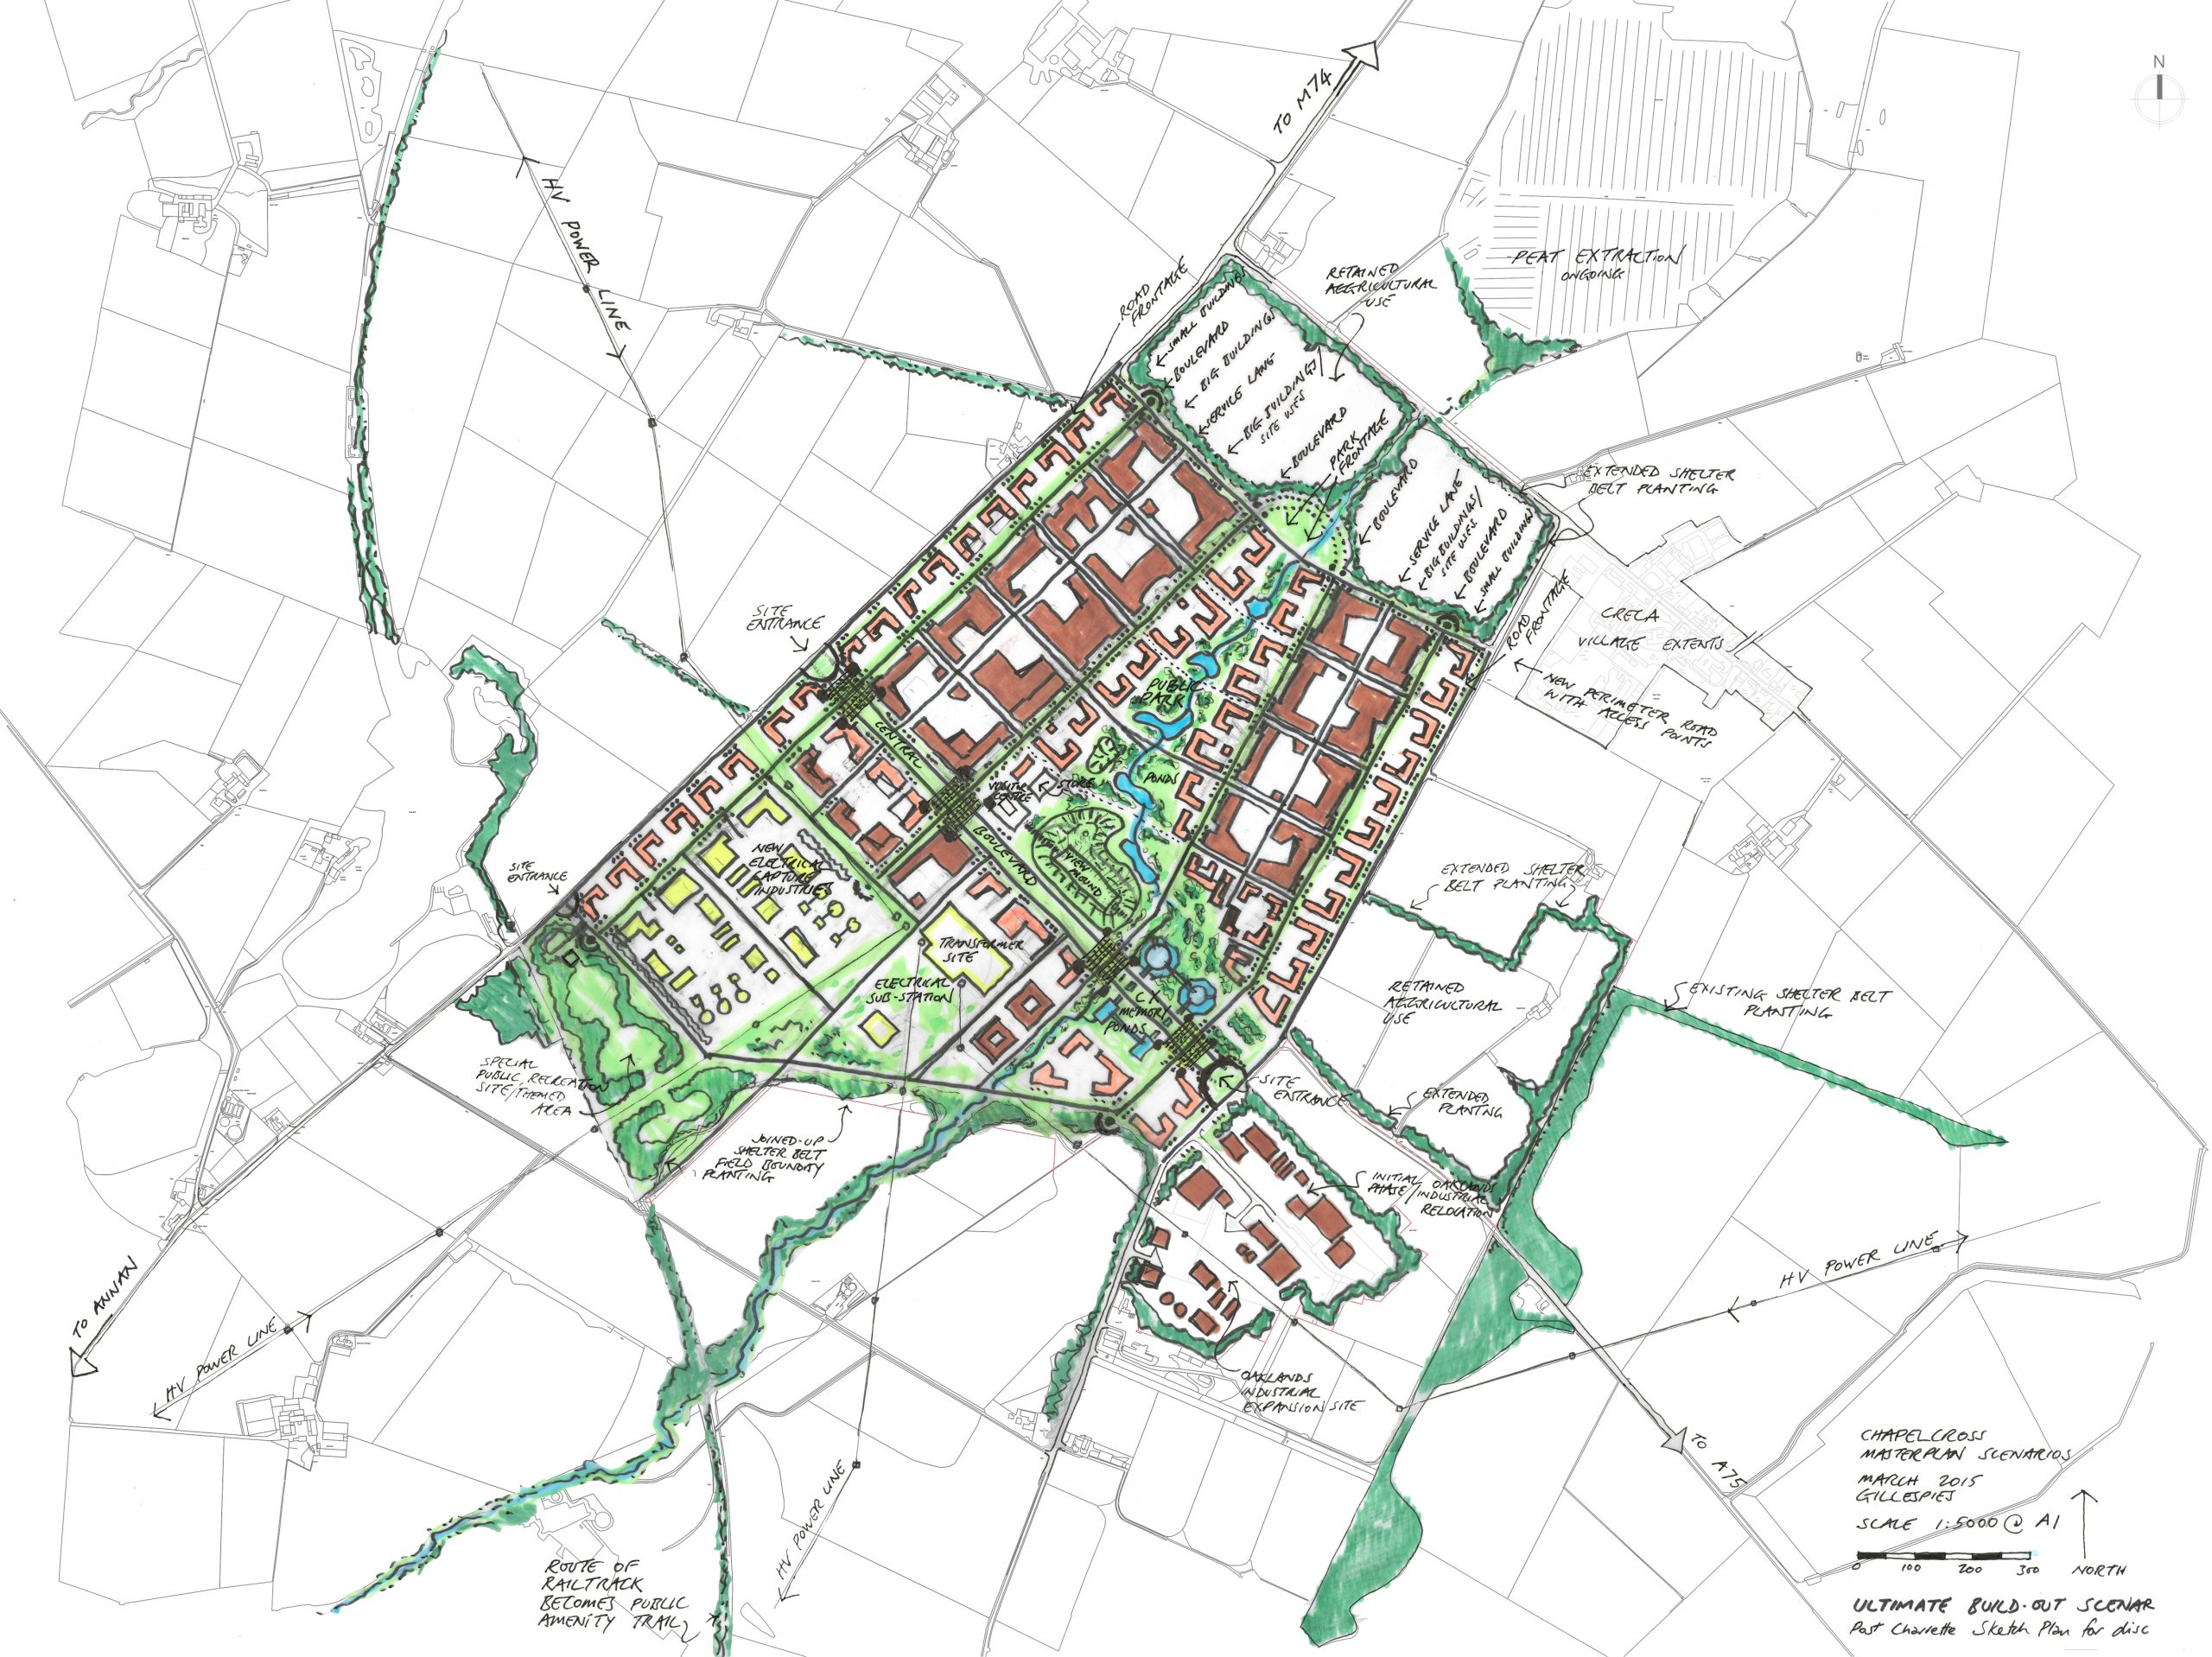 Tree lined boulevard plan for n-plant site